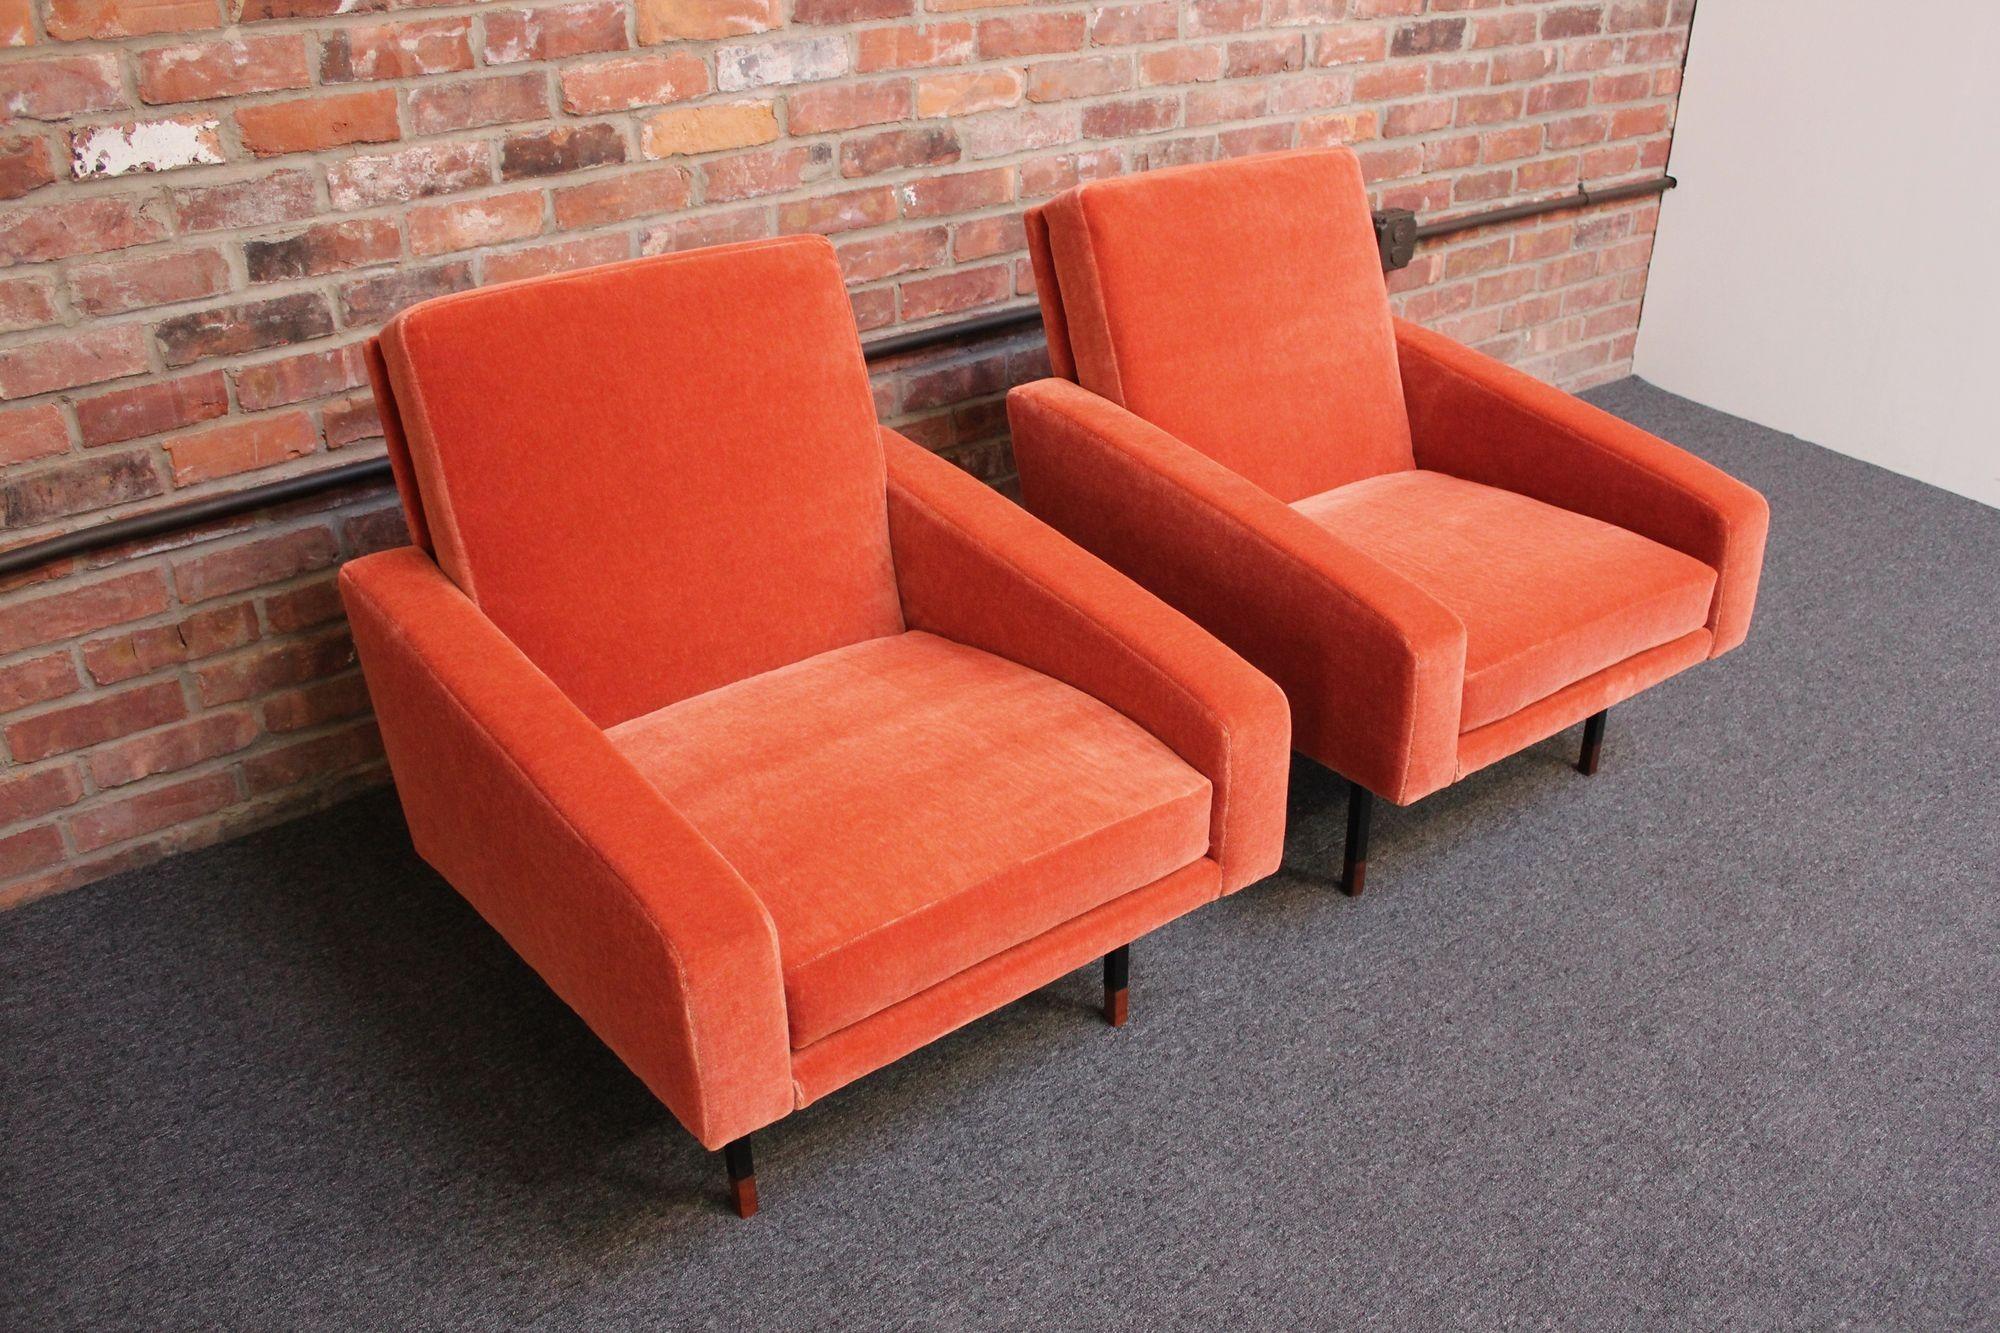 Pair of arm/lounge chairs designed by Franco Campo and Carlo Graffi and manufactured by Home Torino (ca. 1950s, Italy).
Composed of painted black metal frames with Italian walnut block feet and seats newly upholstered in a blood-orange/coral mohair